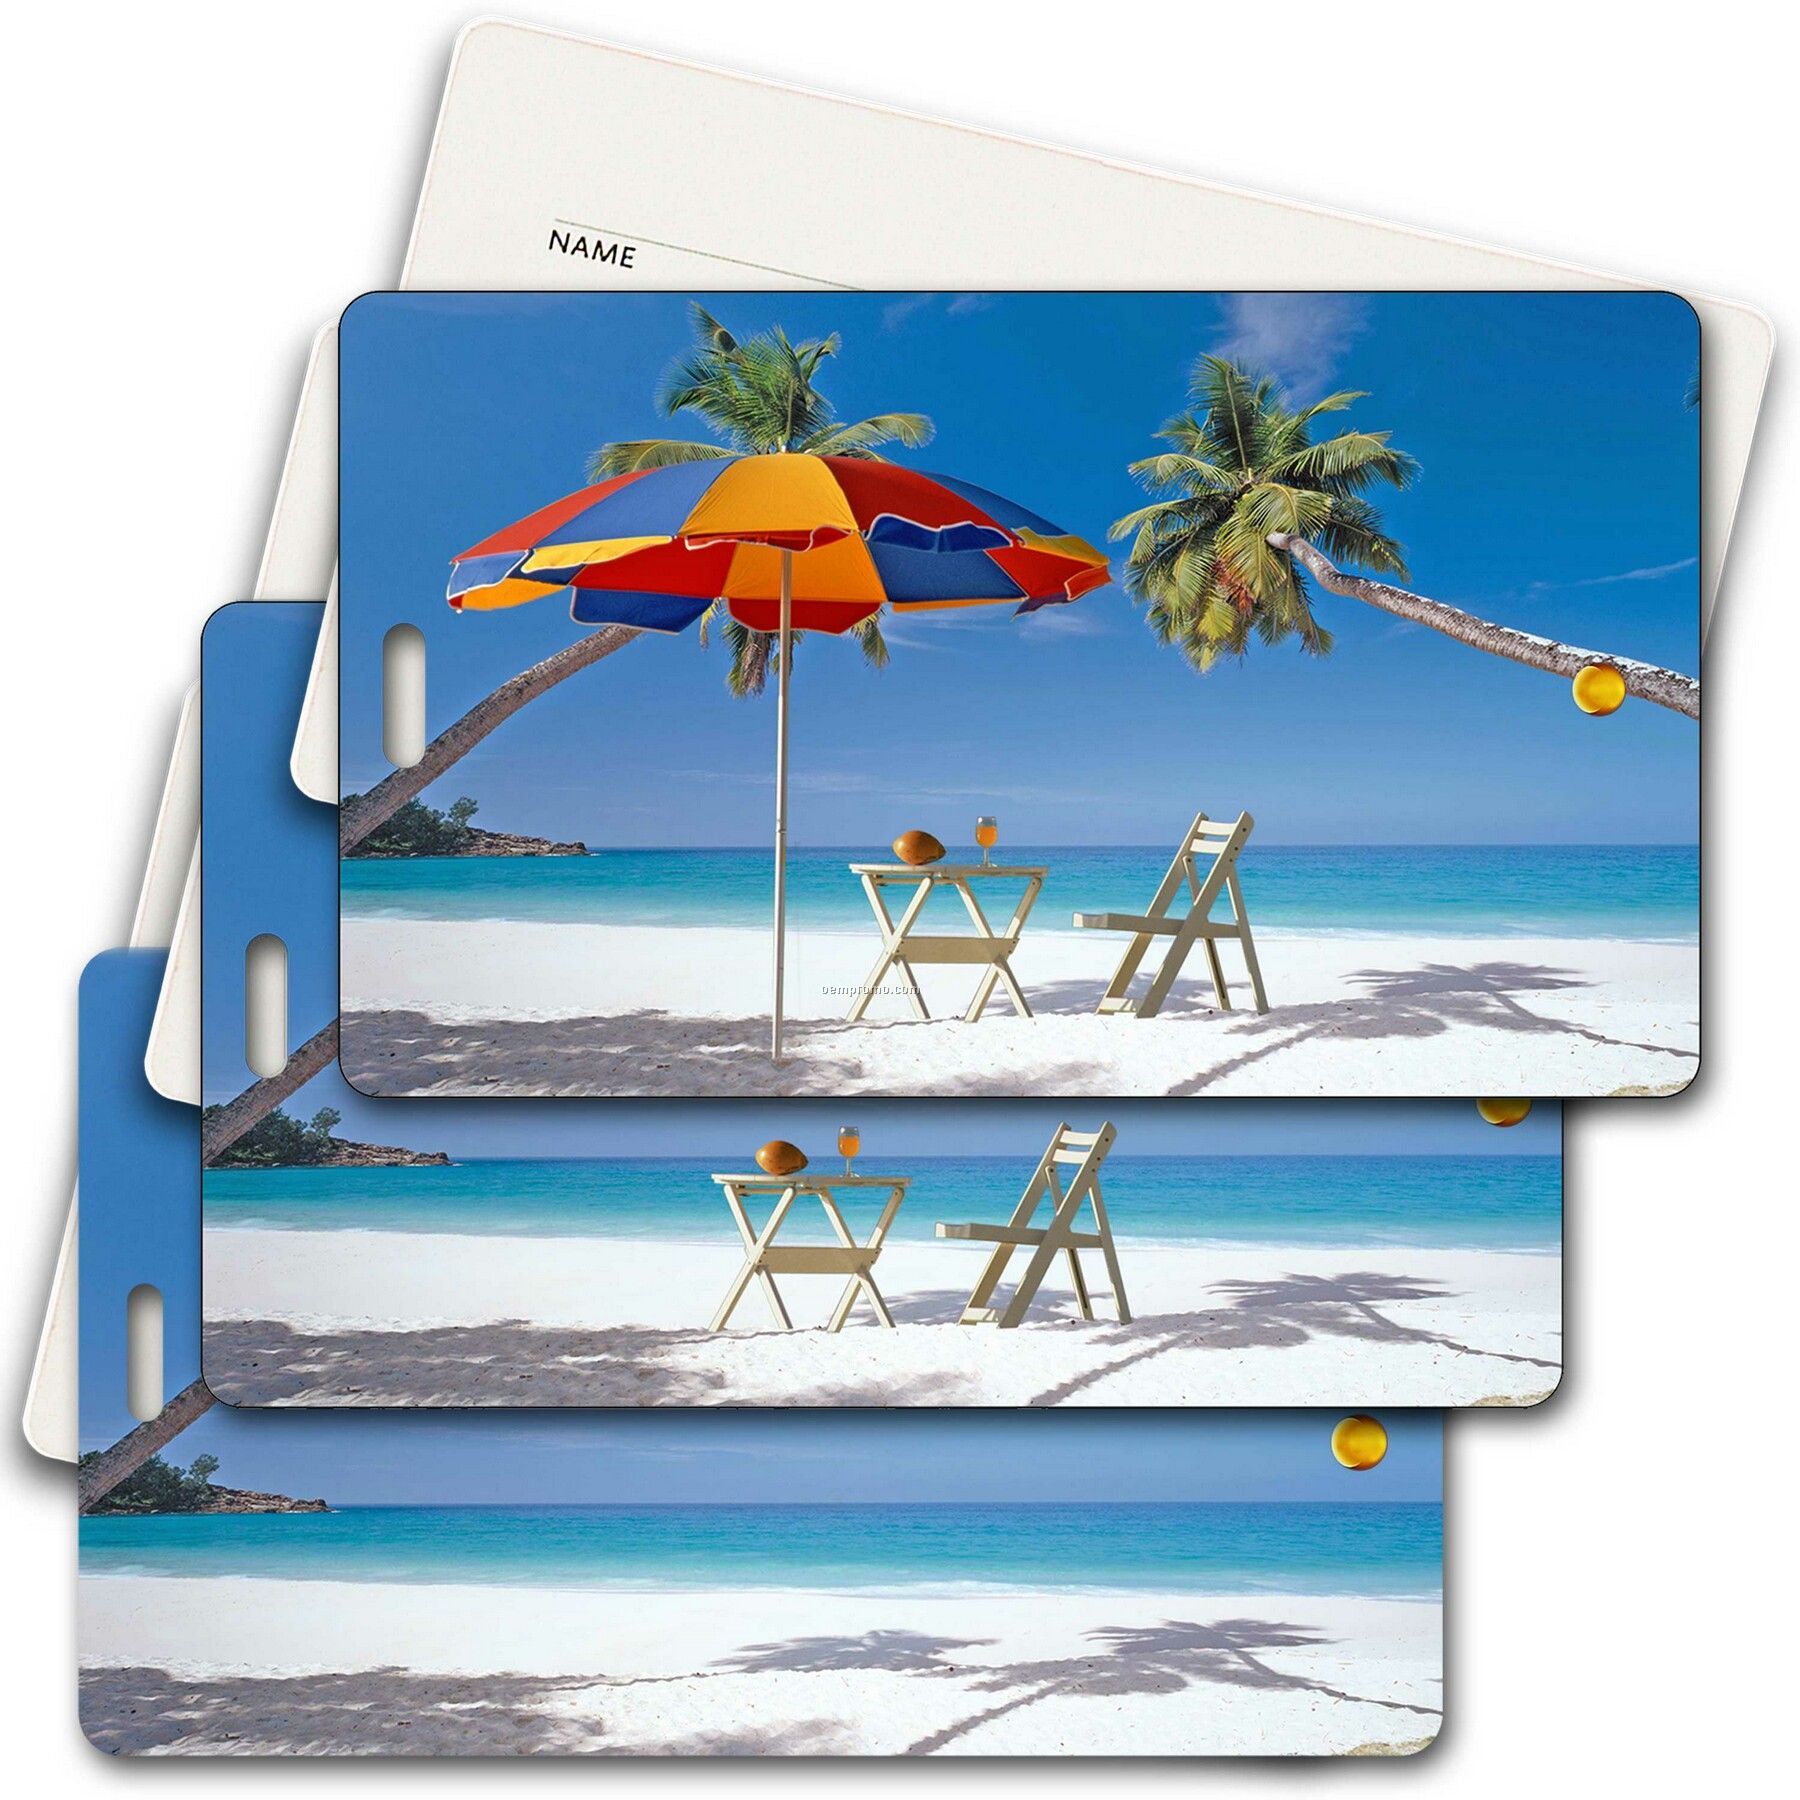 Privacy Tag W/3d Lenticular Images Of A Beach W/Umbrella (Blanks)